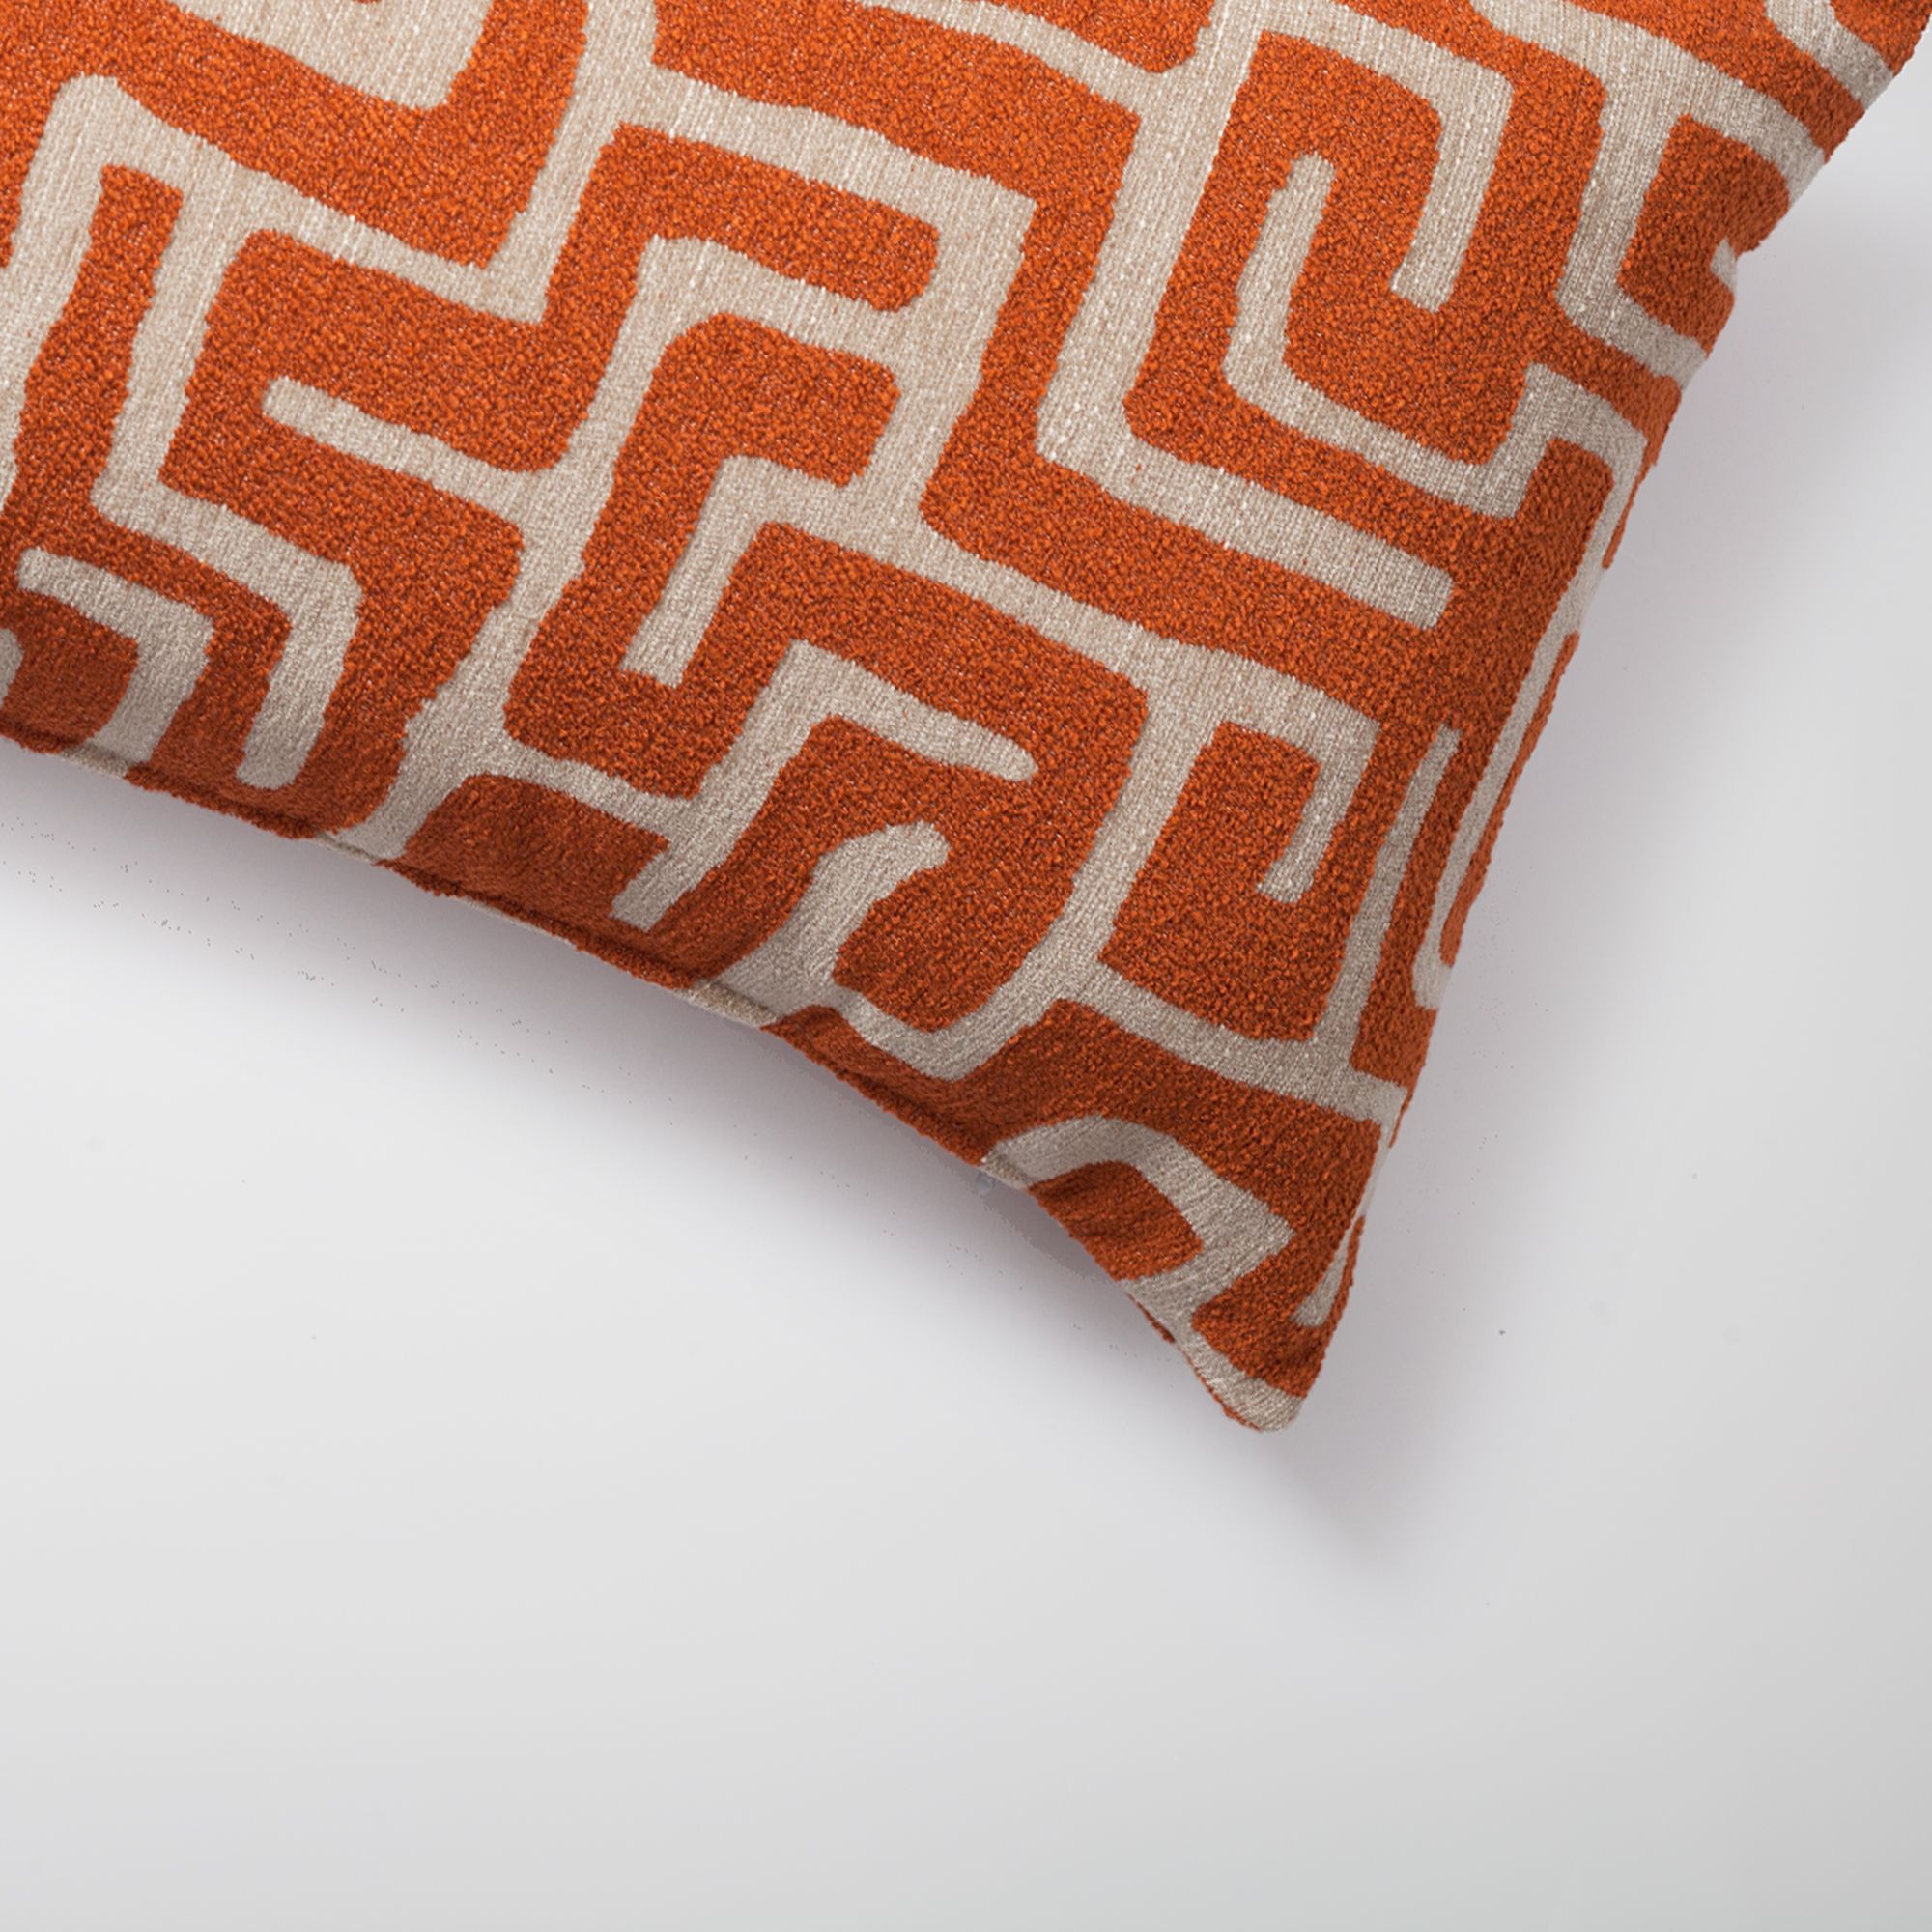 "Norm" - Maze Patterned 14x28 Inch Pillow - Orange (Cover Only)